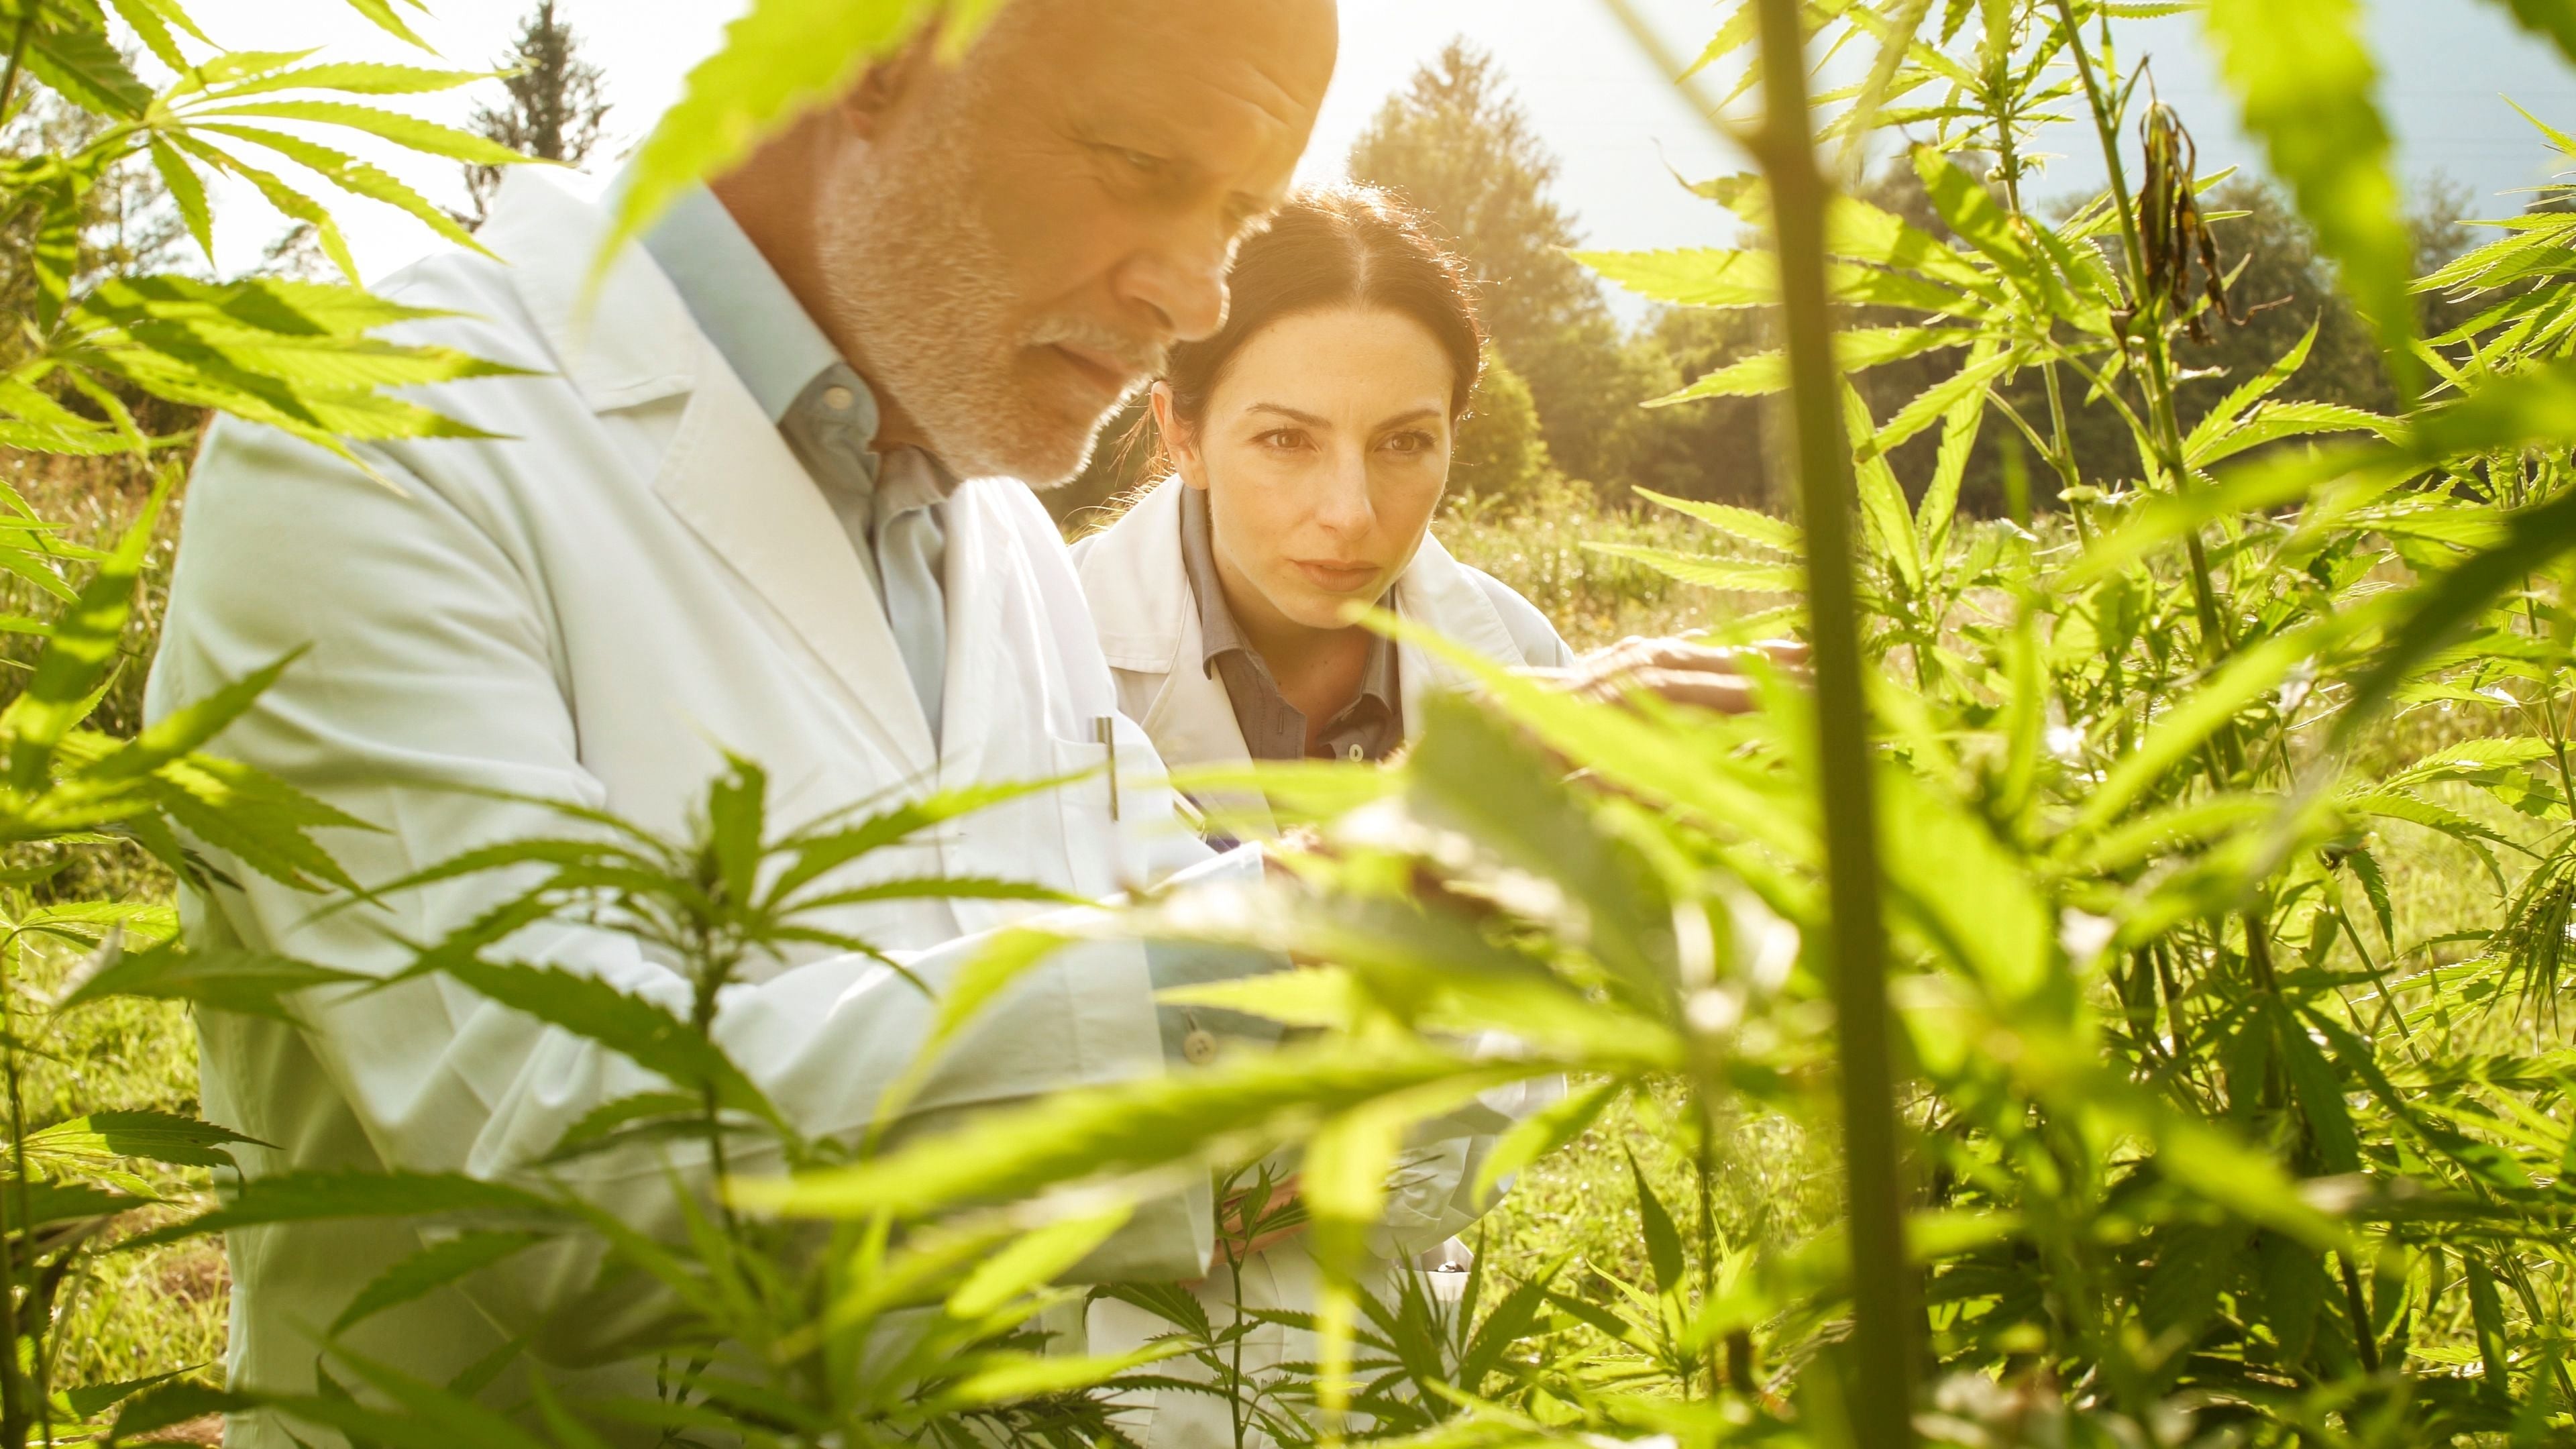 Five important takeaways from the Midwestern Hemp Database 2020 Research Report